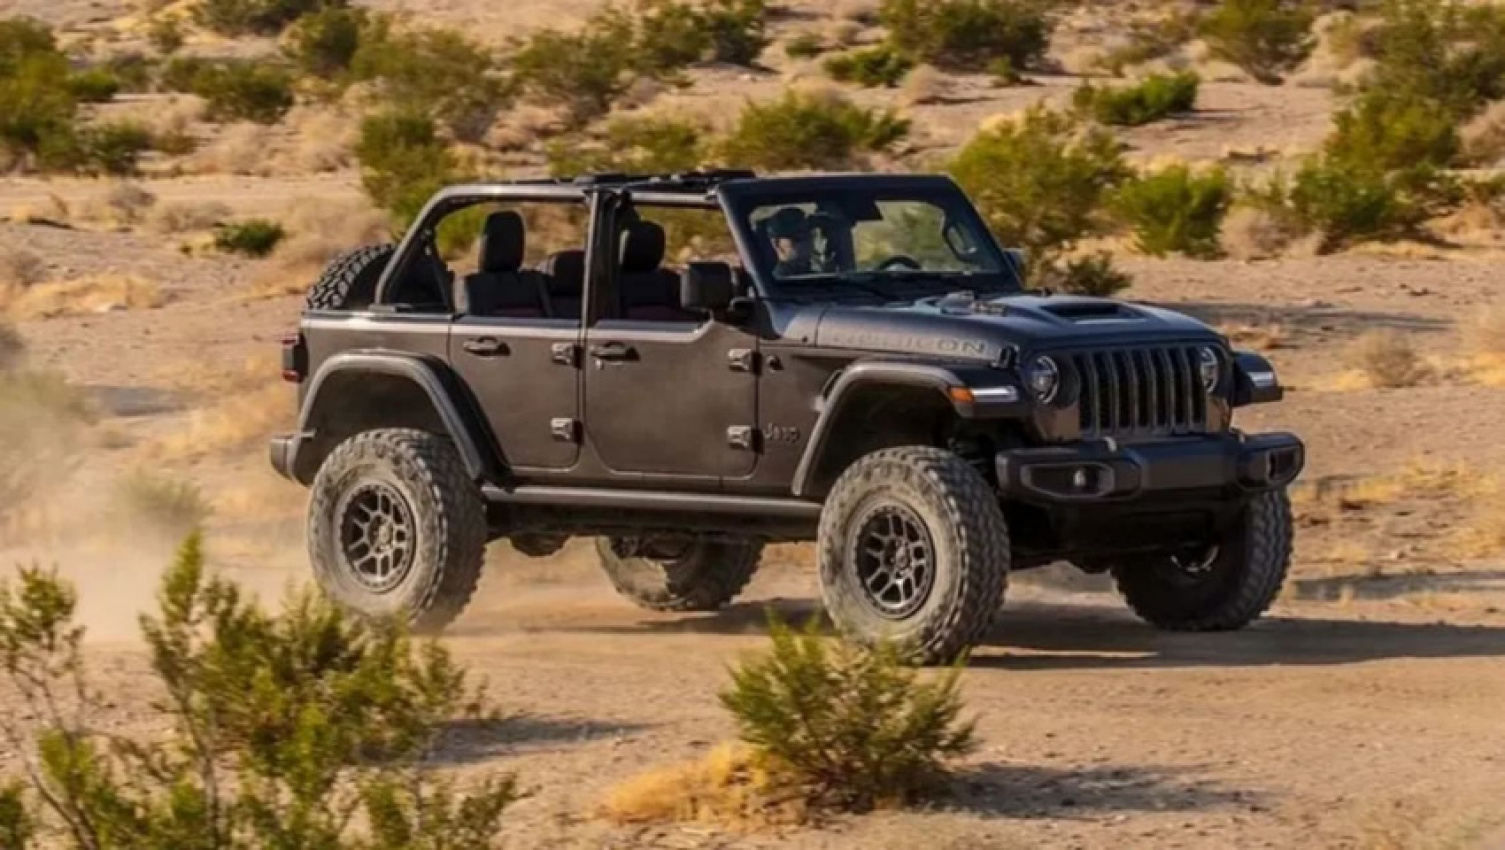 autos, cars, jeep, electric, electric cars, hybrid cars, industry news, jeep gladiator, jeep gladiator 2022, jeep news, jeep suv range, jeep wrangler, jeep wrangler 2022, off-road, showroom news, have we seen the final v8 jeep? or is there still hope for hi-po version of gladiator, grand cherokee and more?